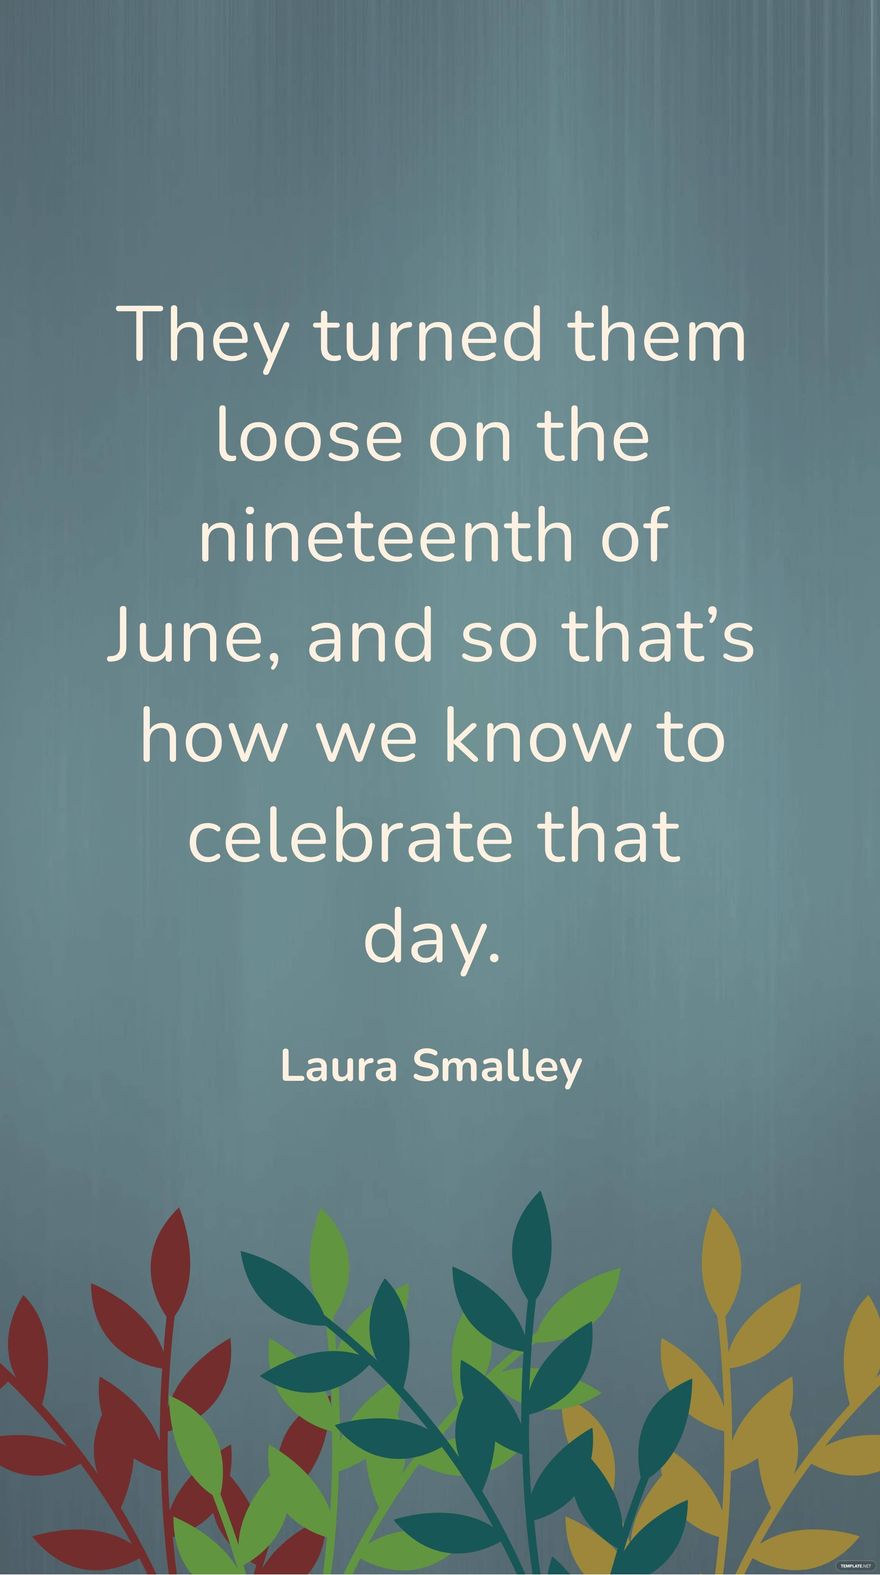 Laura Smalley - They turned them loose on the nineteenth of June, and so that’s how we know to celebrate that day.